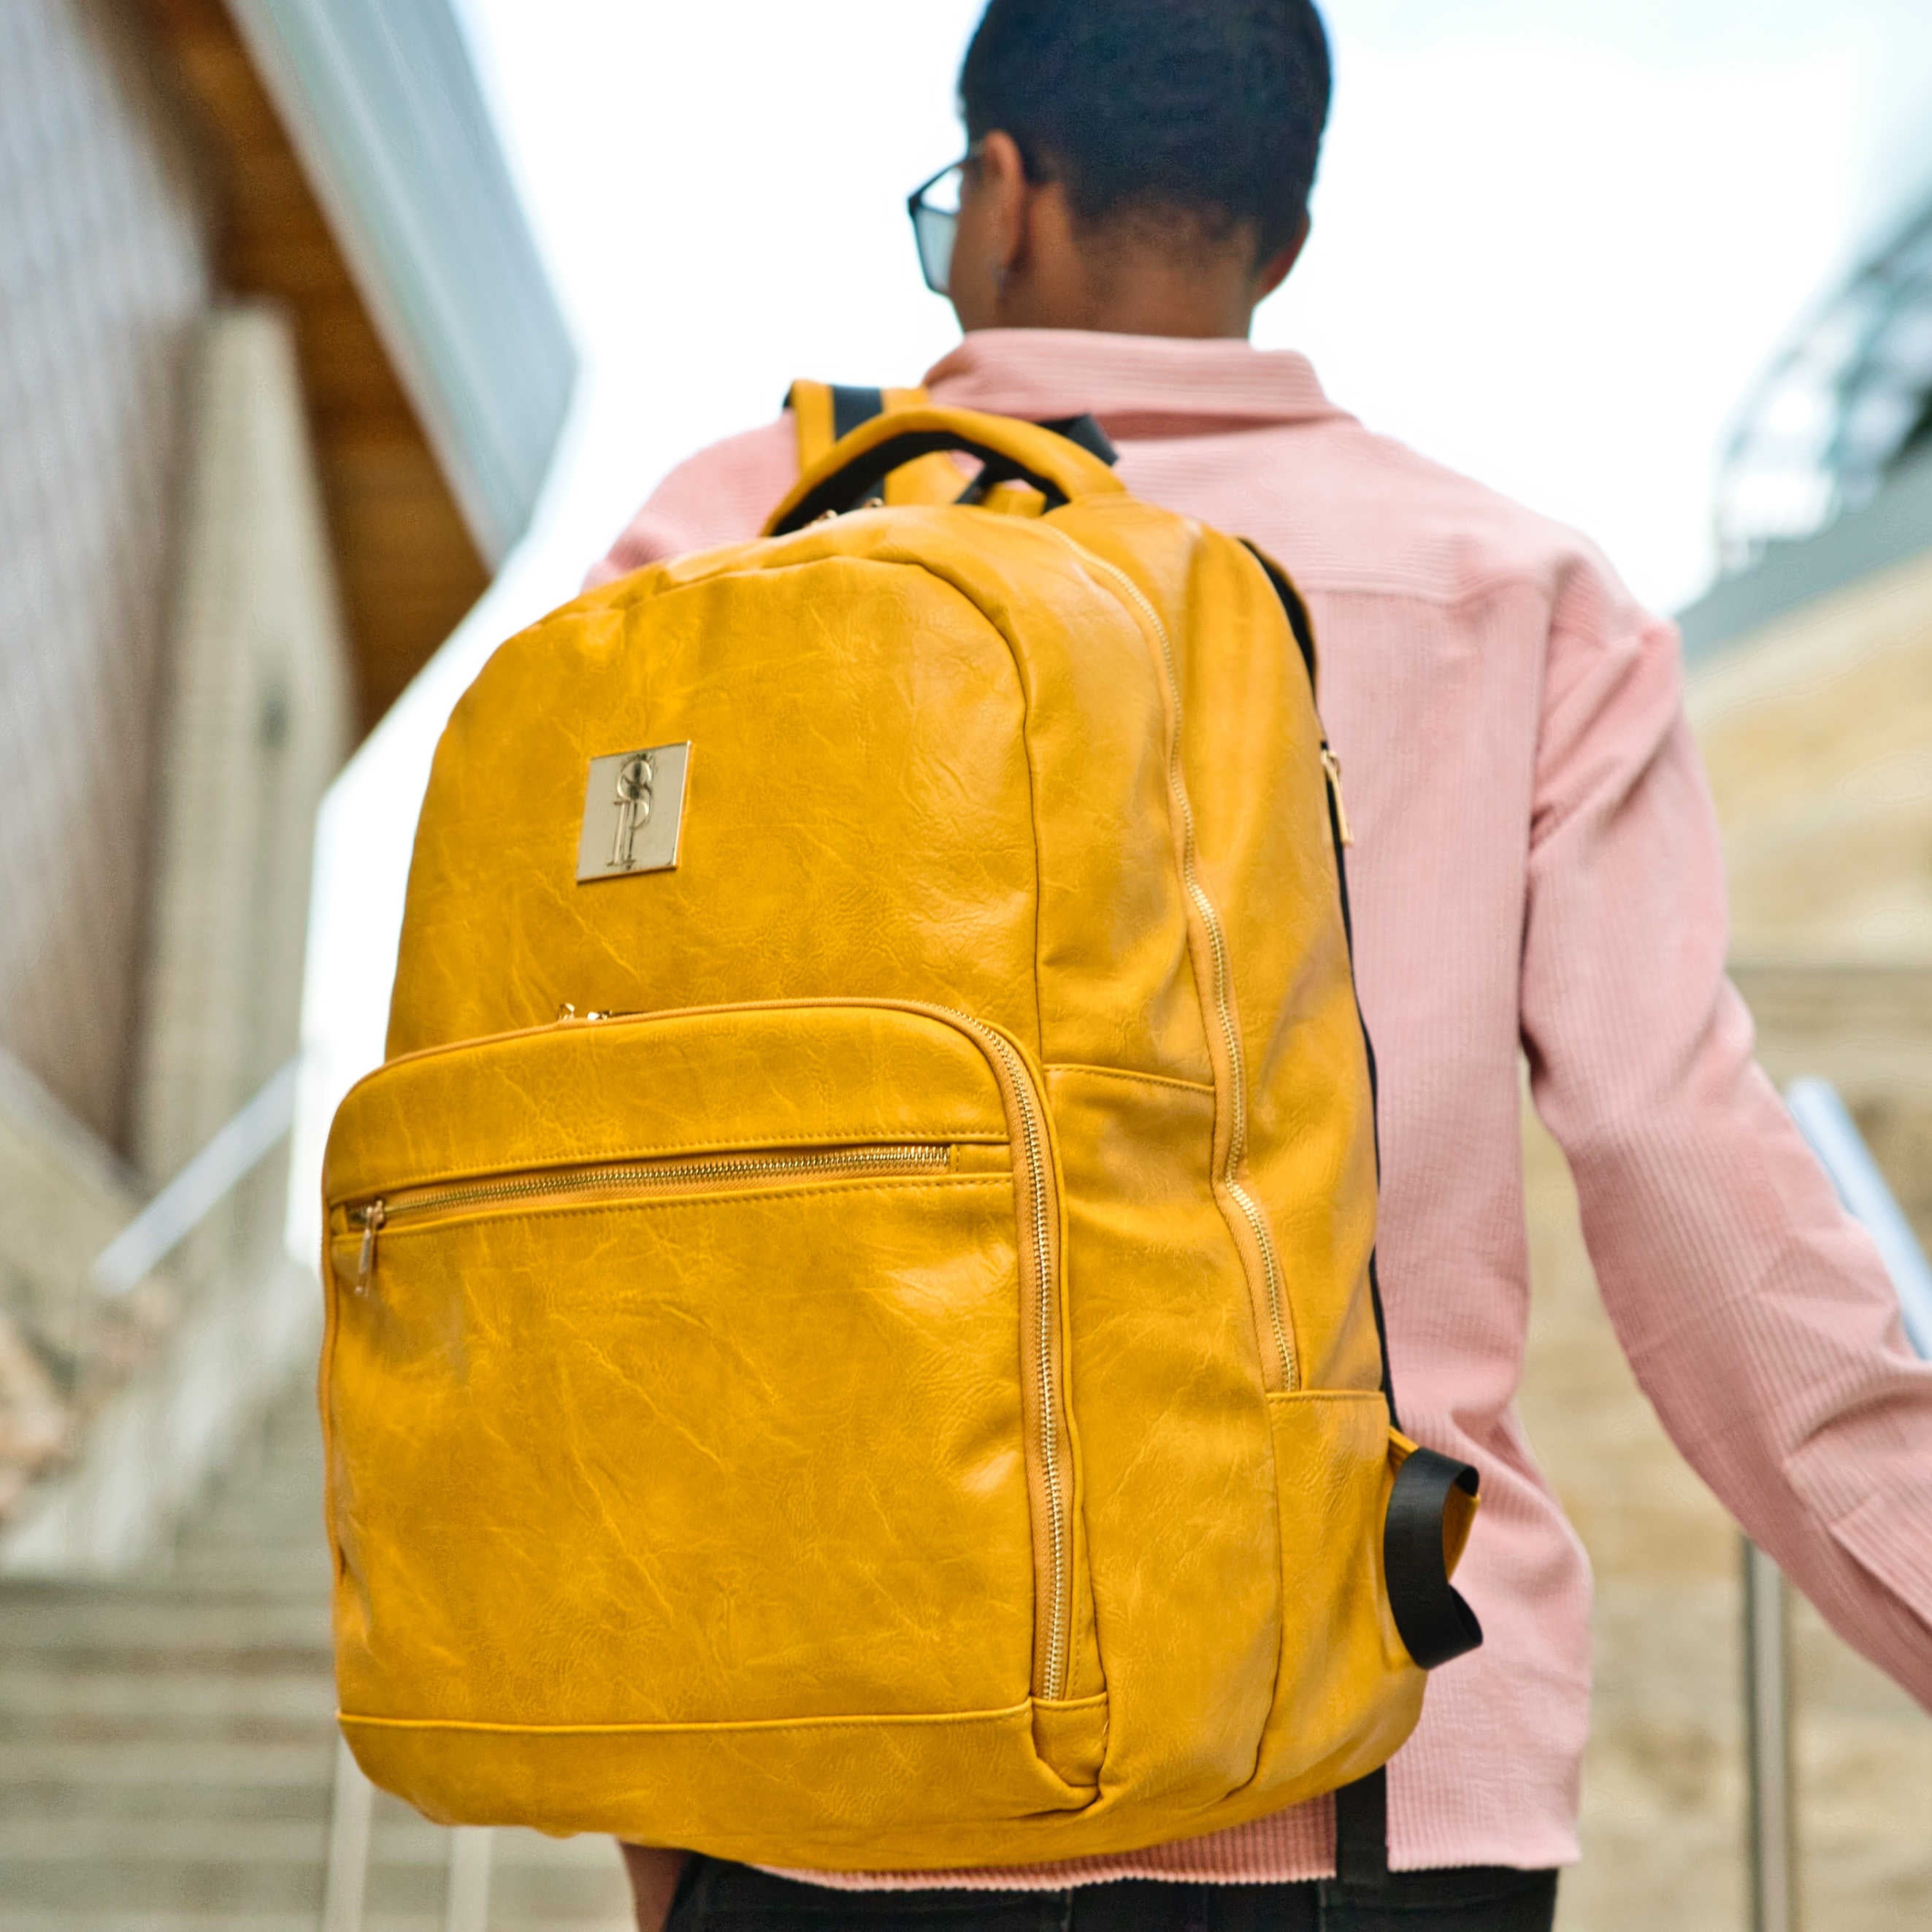 Yellow Tumbled Leather Commuter Bag - Sole Premise